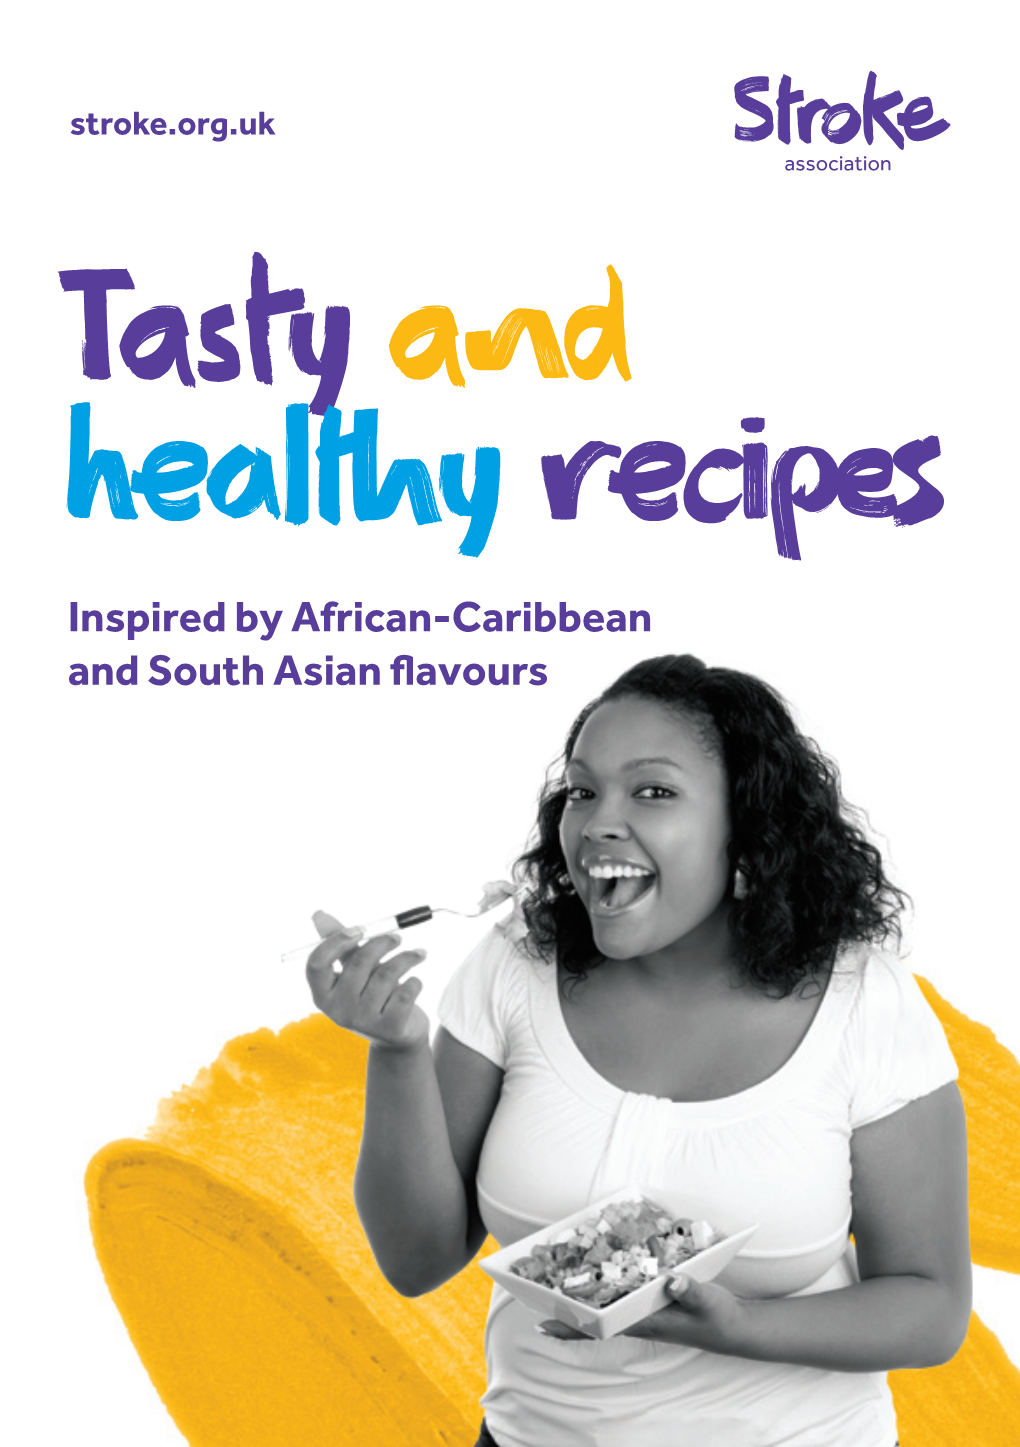 Tasty and Healthy Recipes Inspired by African-Caribbean and South Asian Flavours We Are the Stroke Association